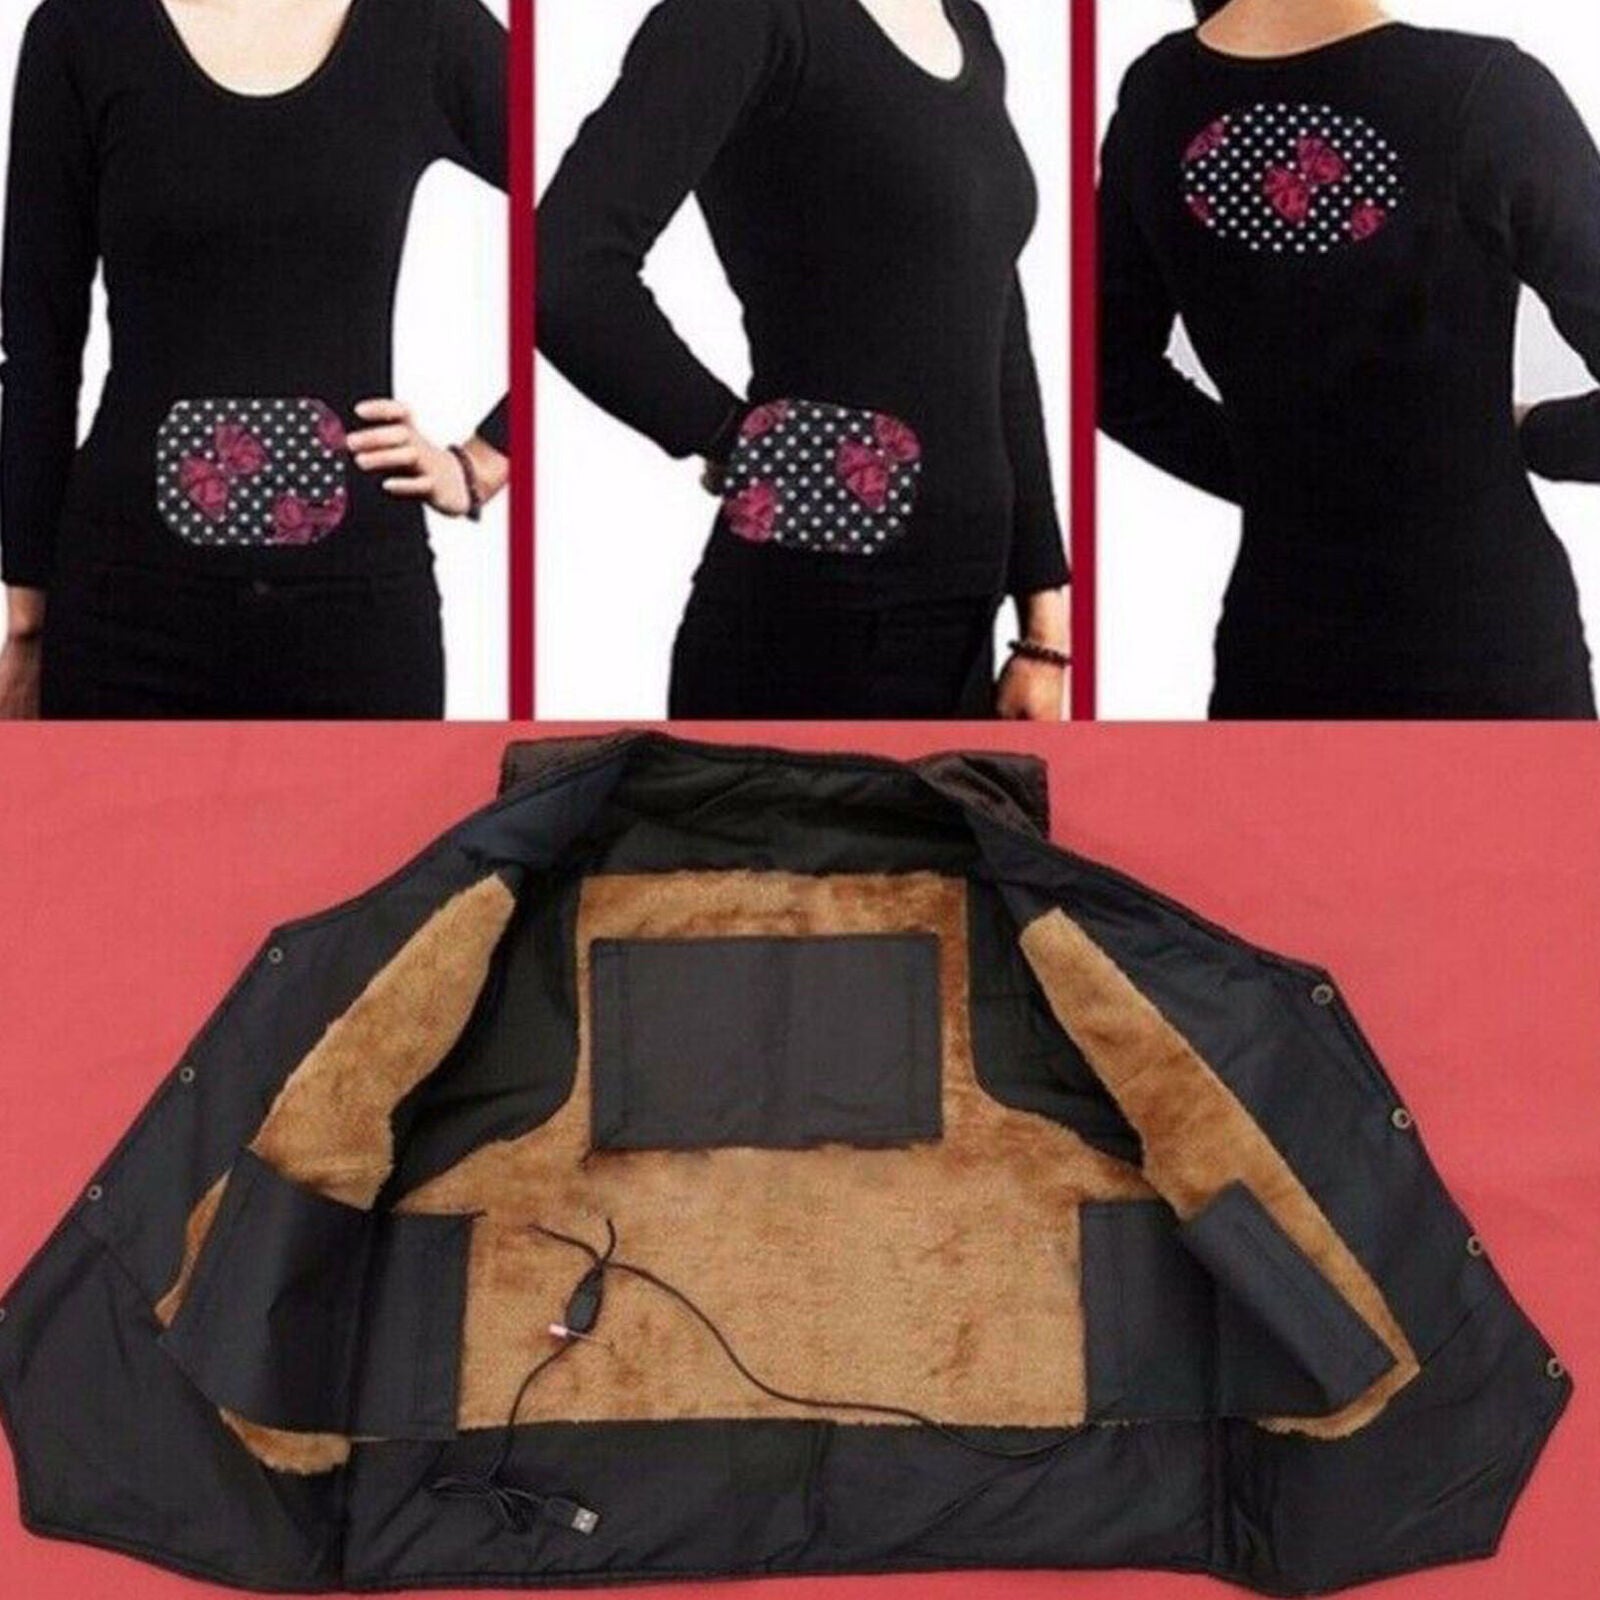 8-in-1 Electric Vest Heater Warm Cloth Jacket USB Thermal Heated Pad Body Warmer